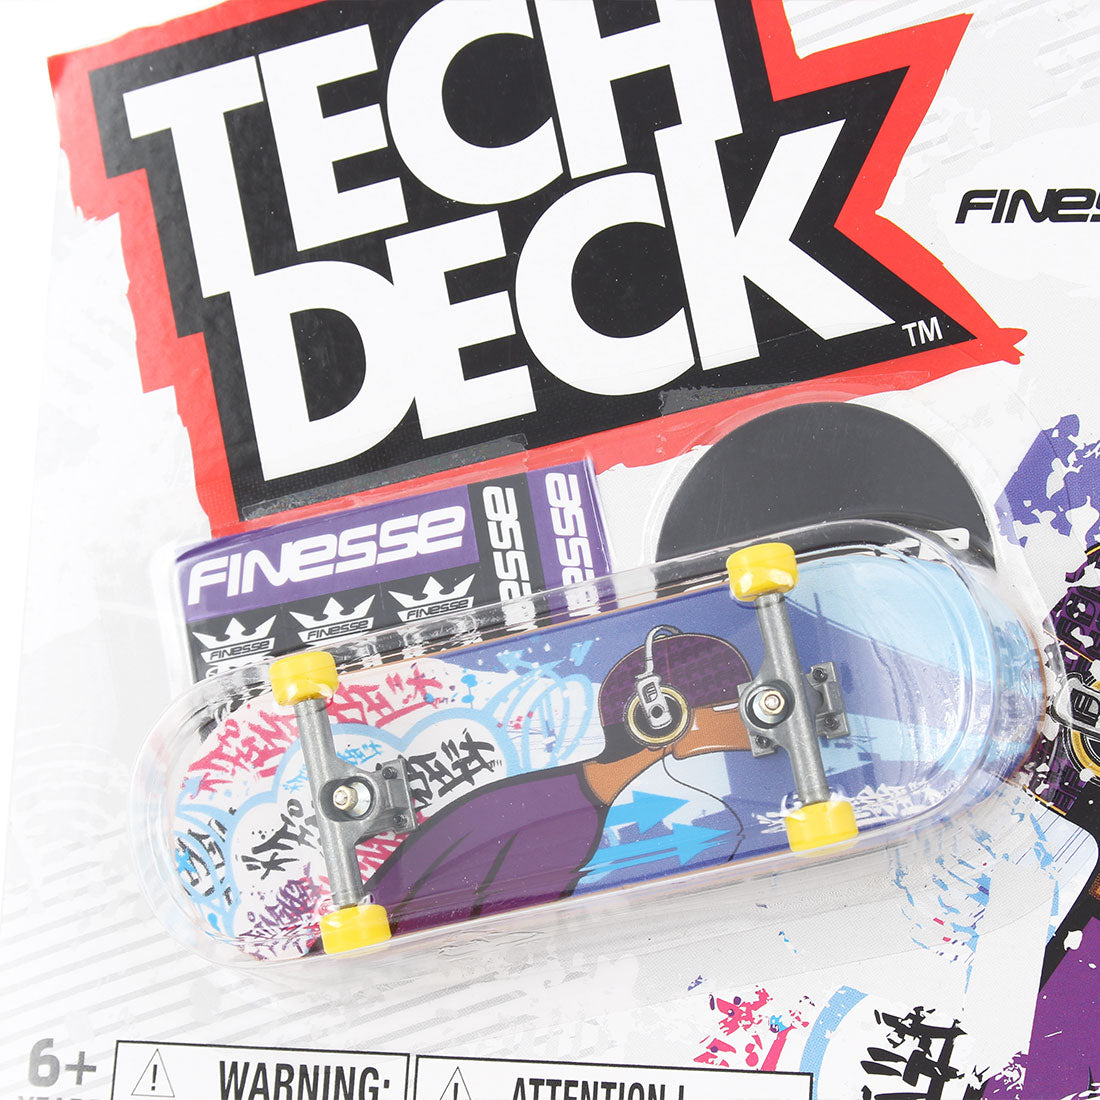 Tech Deck 2022 Series - Finesse - Blue Tag Skateboard Accessories